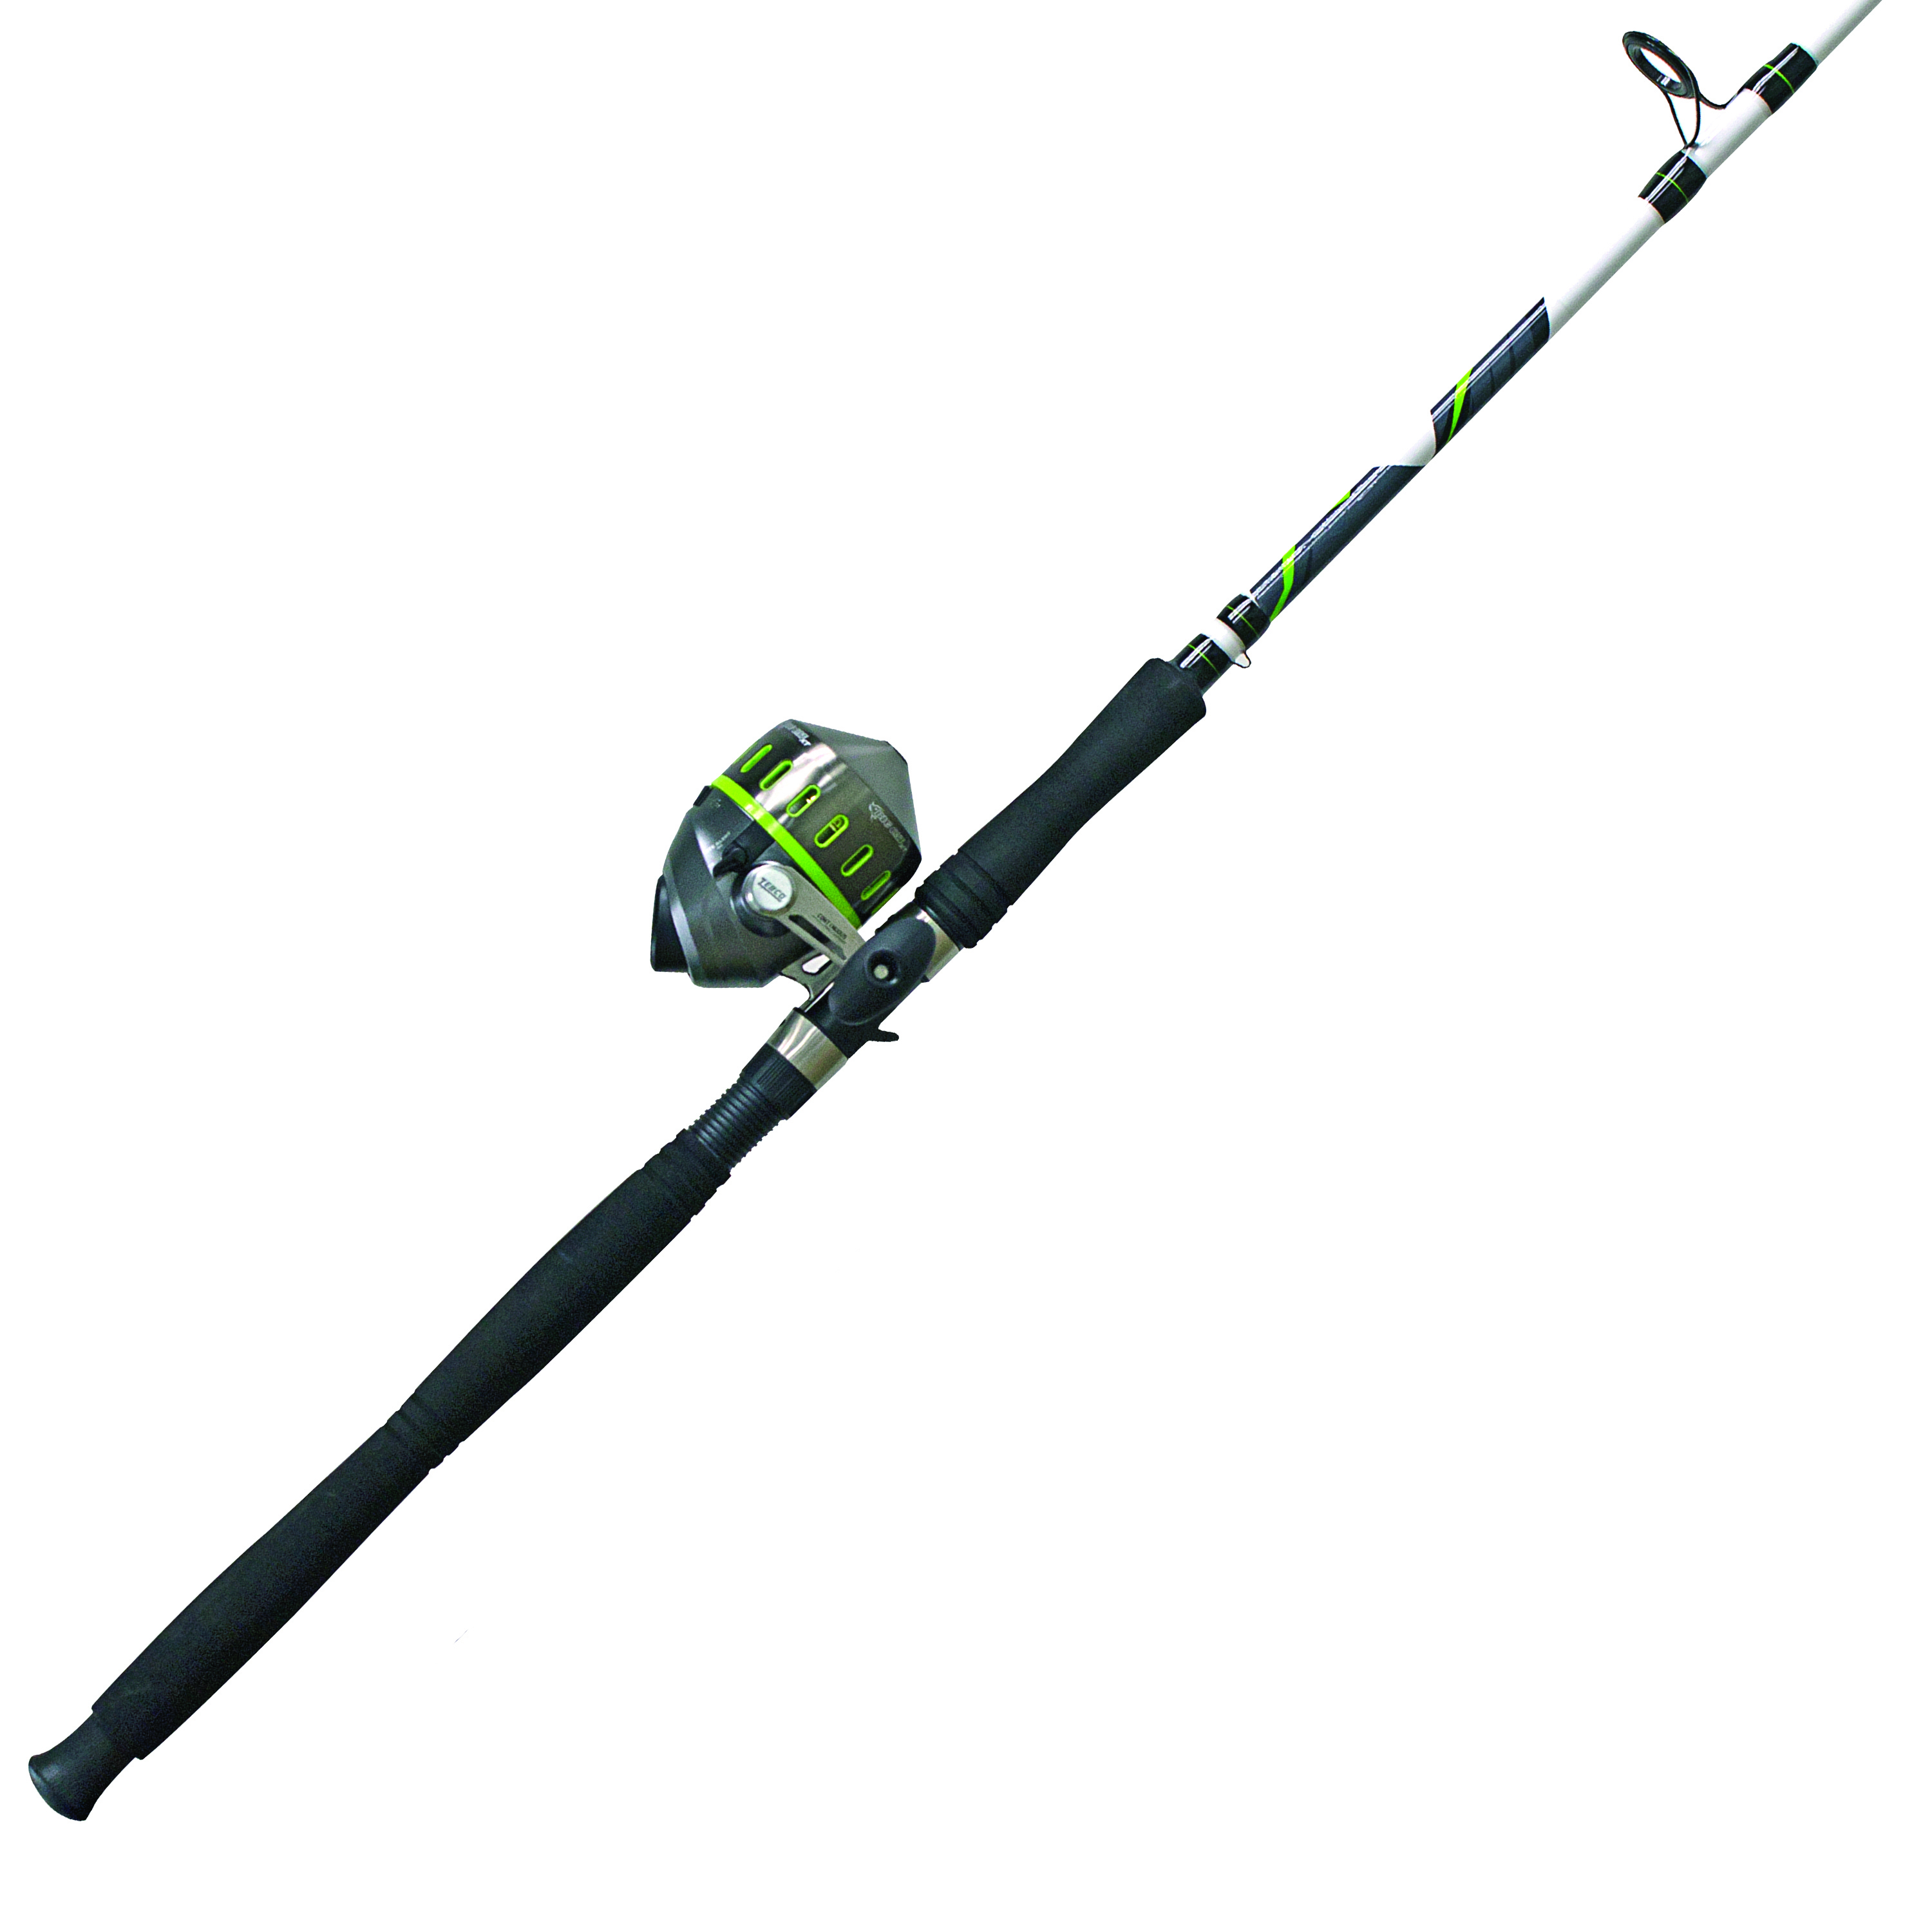 Zebco 808 Boss Hawg Spincast Reel and Fishing Rod Combo